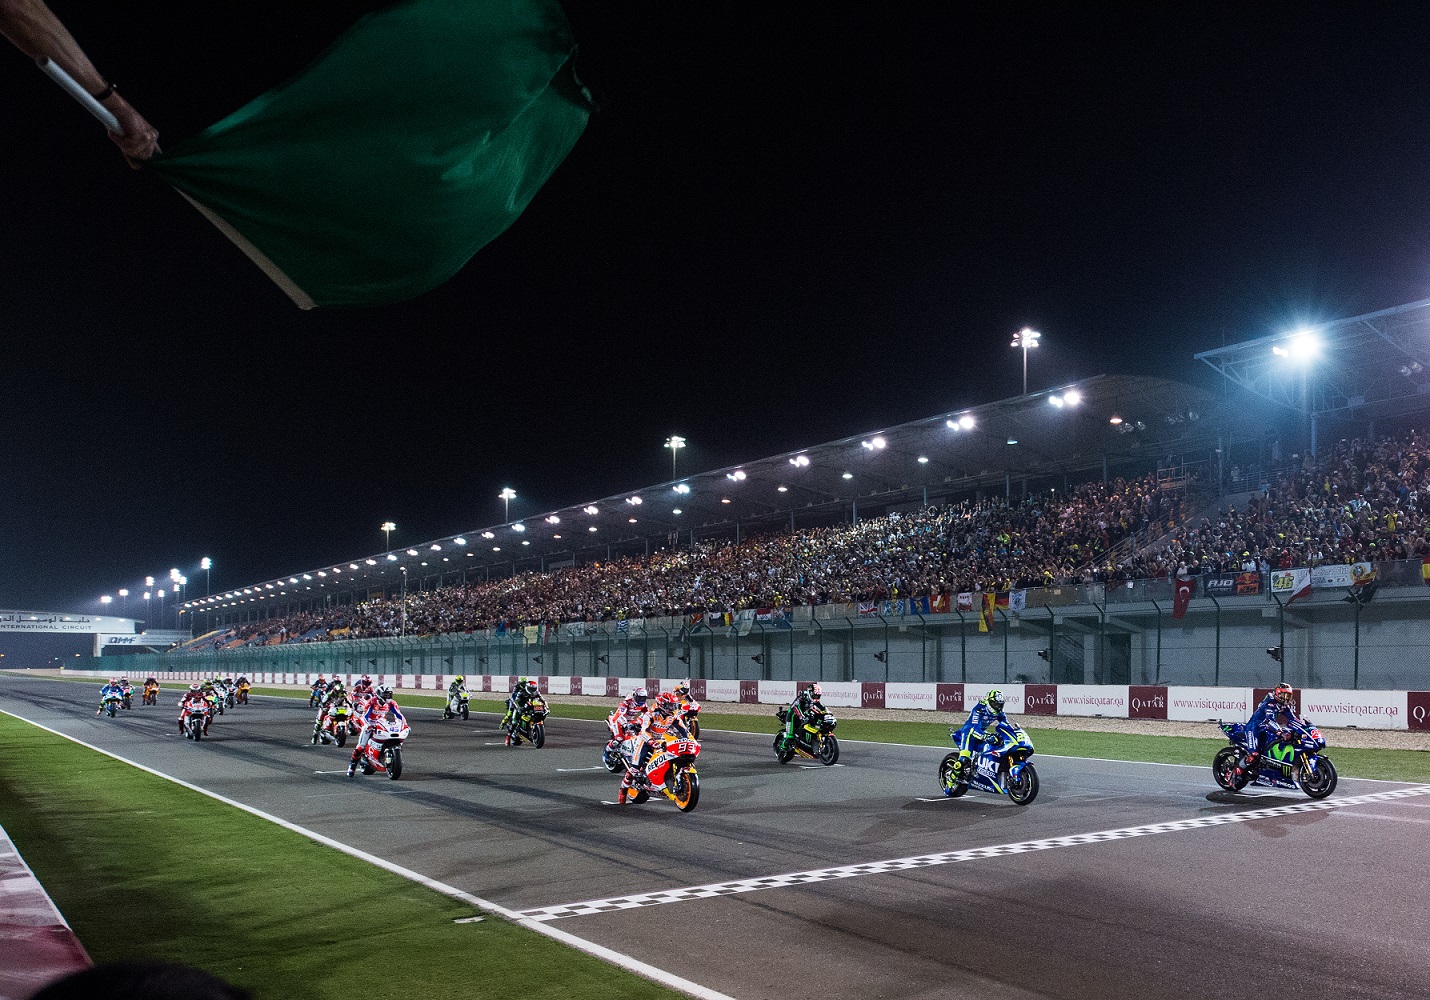 Qatar Airways Holidays Launches MotoGP Travel Packages Travel Pursuit